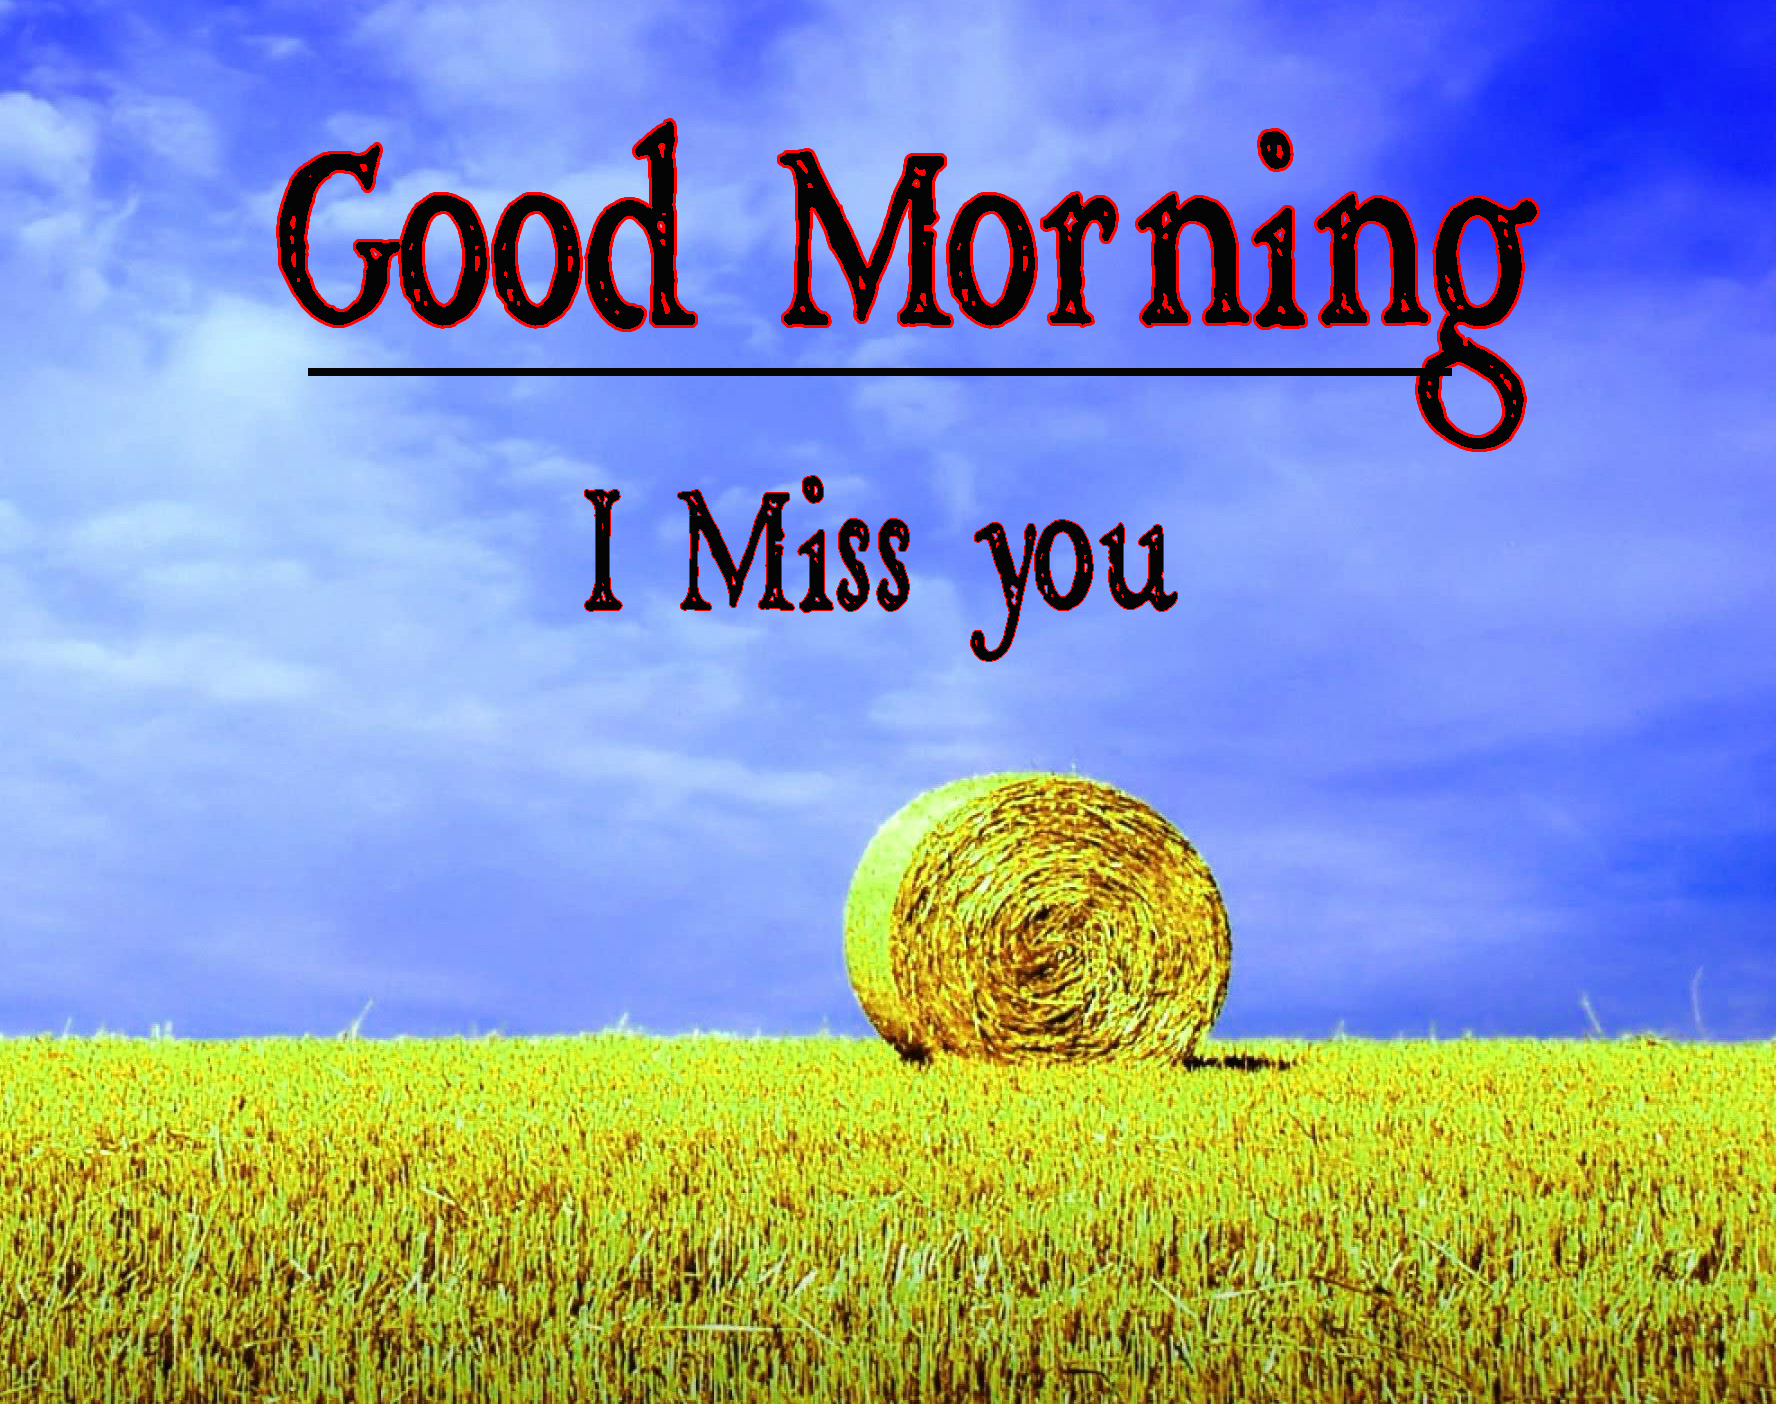 1080p Very Good Morning Images Wallpaper Free Download 